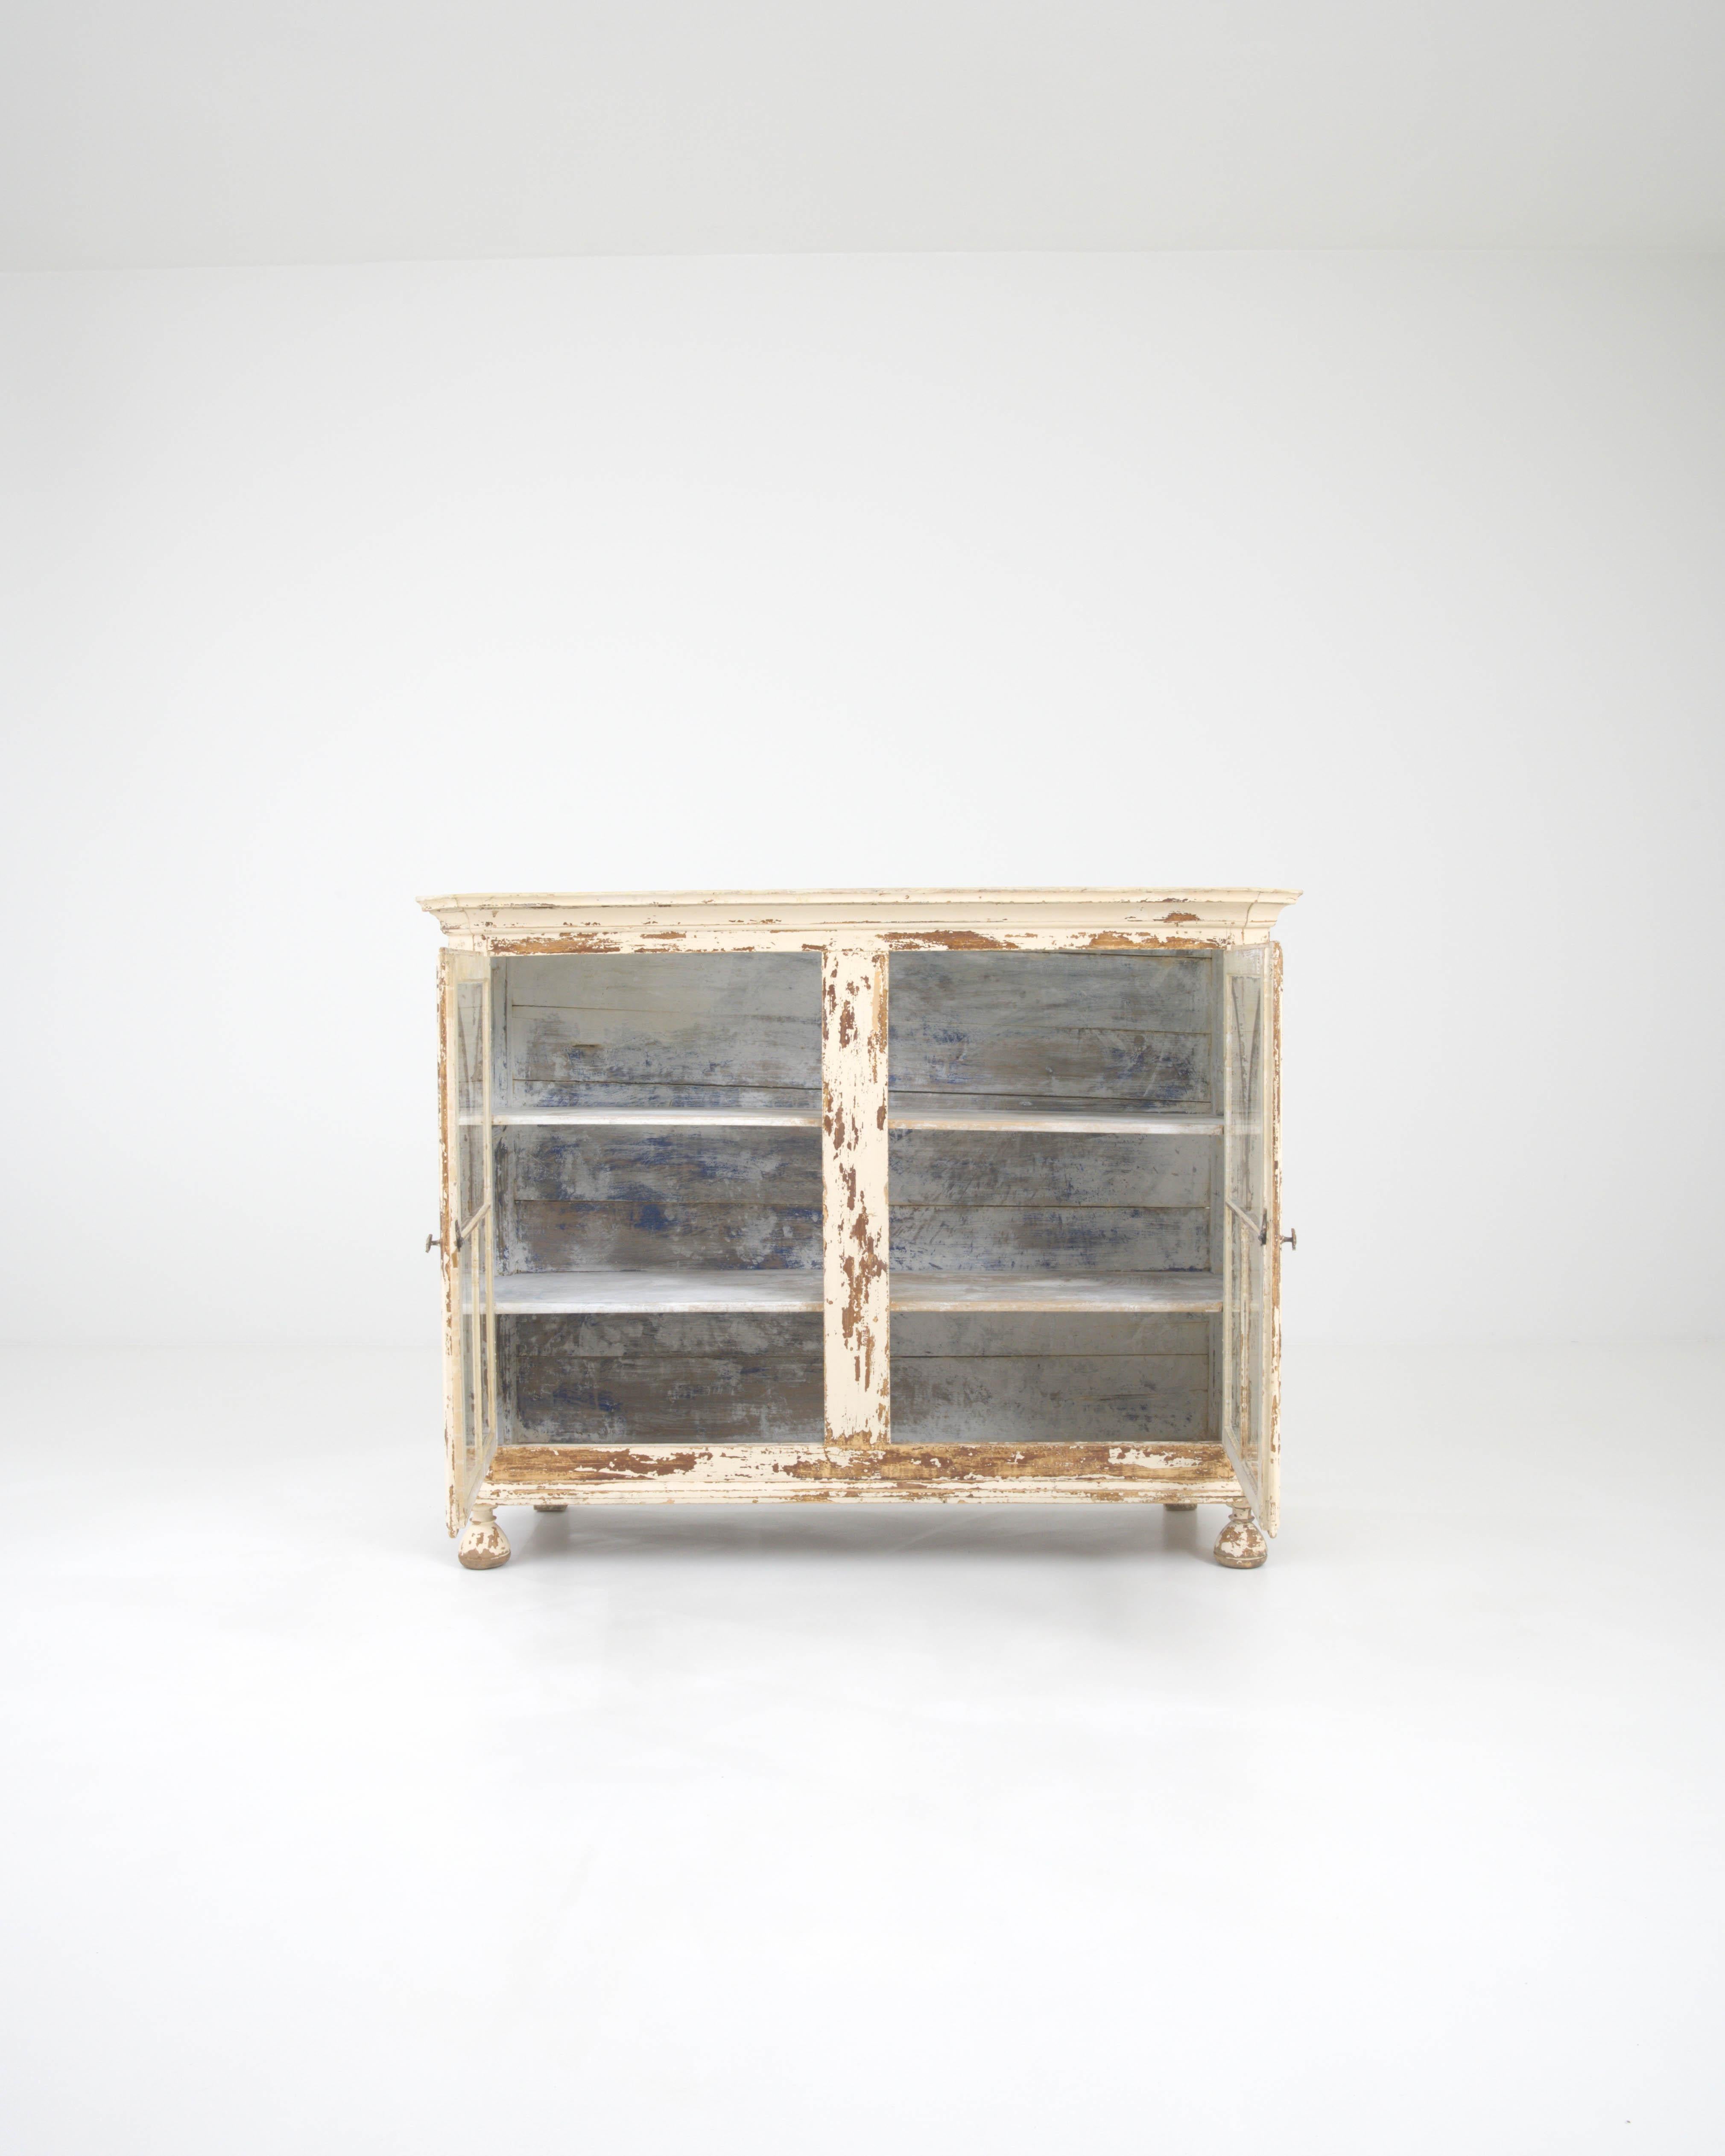 This 19th-century French wood vitrine captures the romantic essence of provincial life with its beautifully patinated finish and classic glass-paneled doors. The worn white paint reveals the time-weathered wood beneath, a testament to its journey